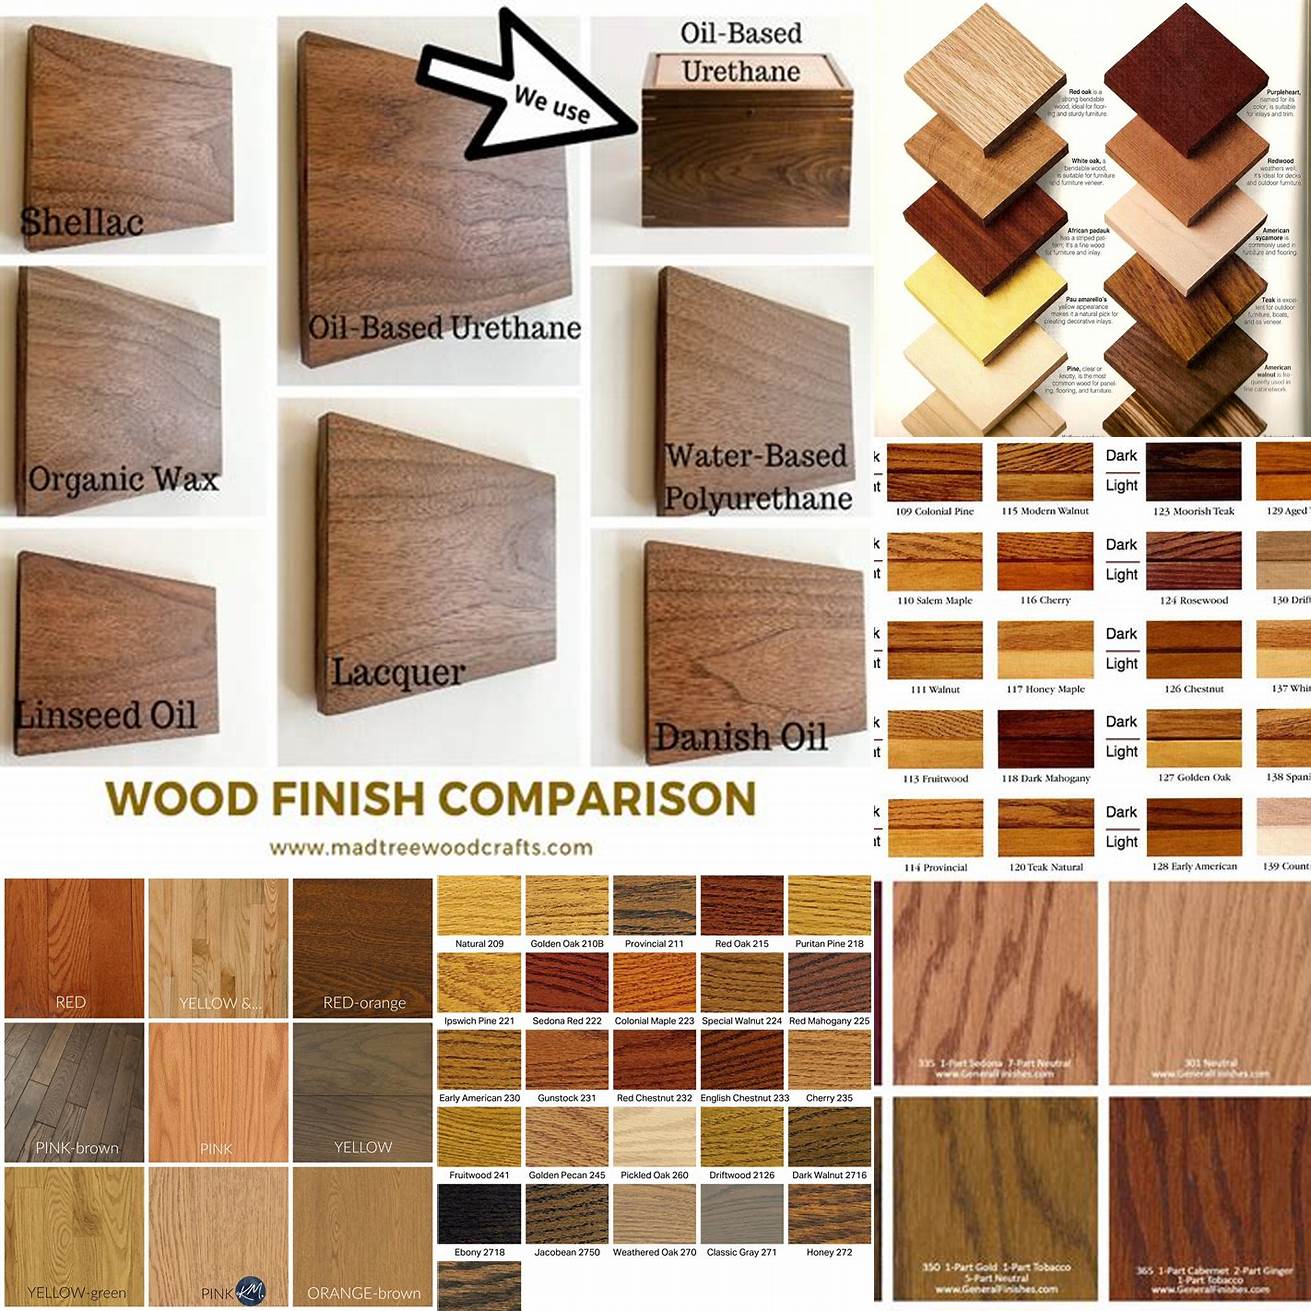 A comparison of finishes